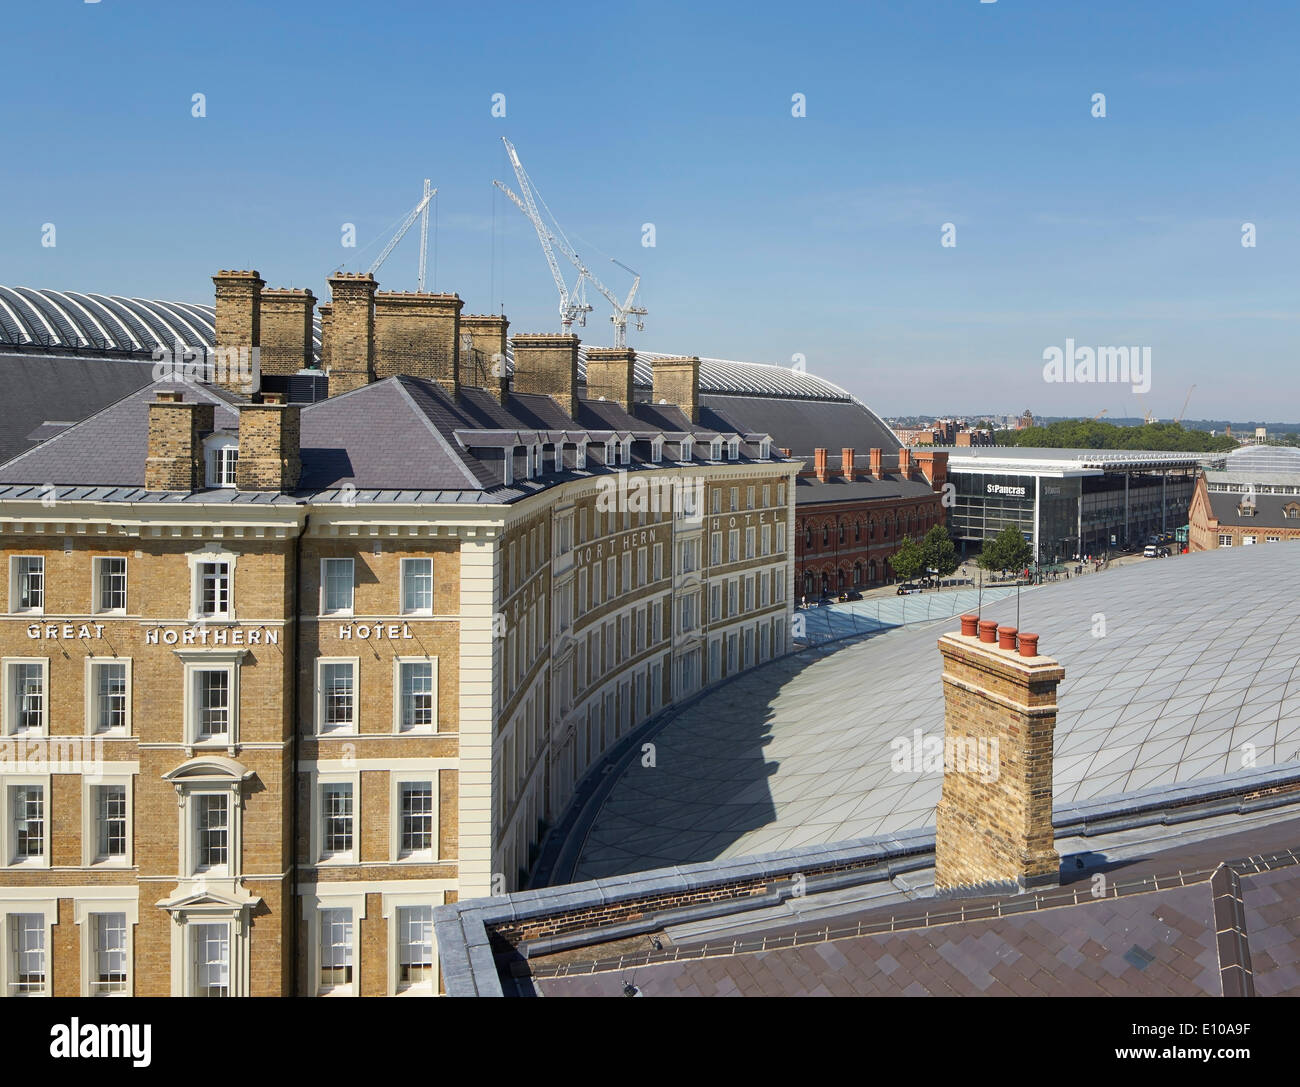 King's Cross trainshed, London, United Kingdom. Architect: Network Rail, 2013. View of rooftops towards St Pancras. Stock Photo